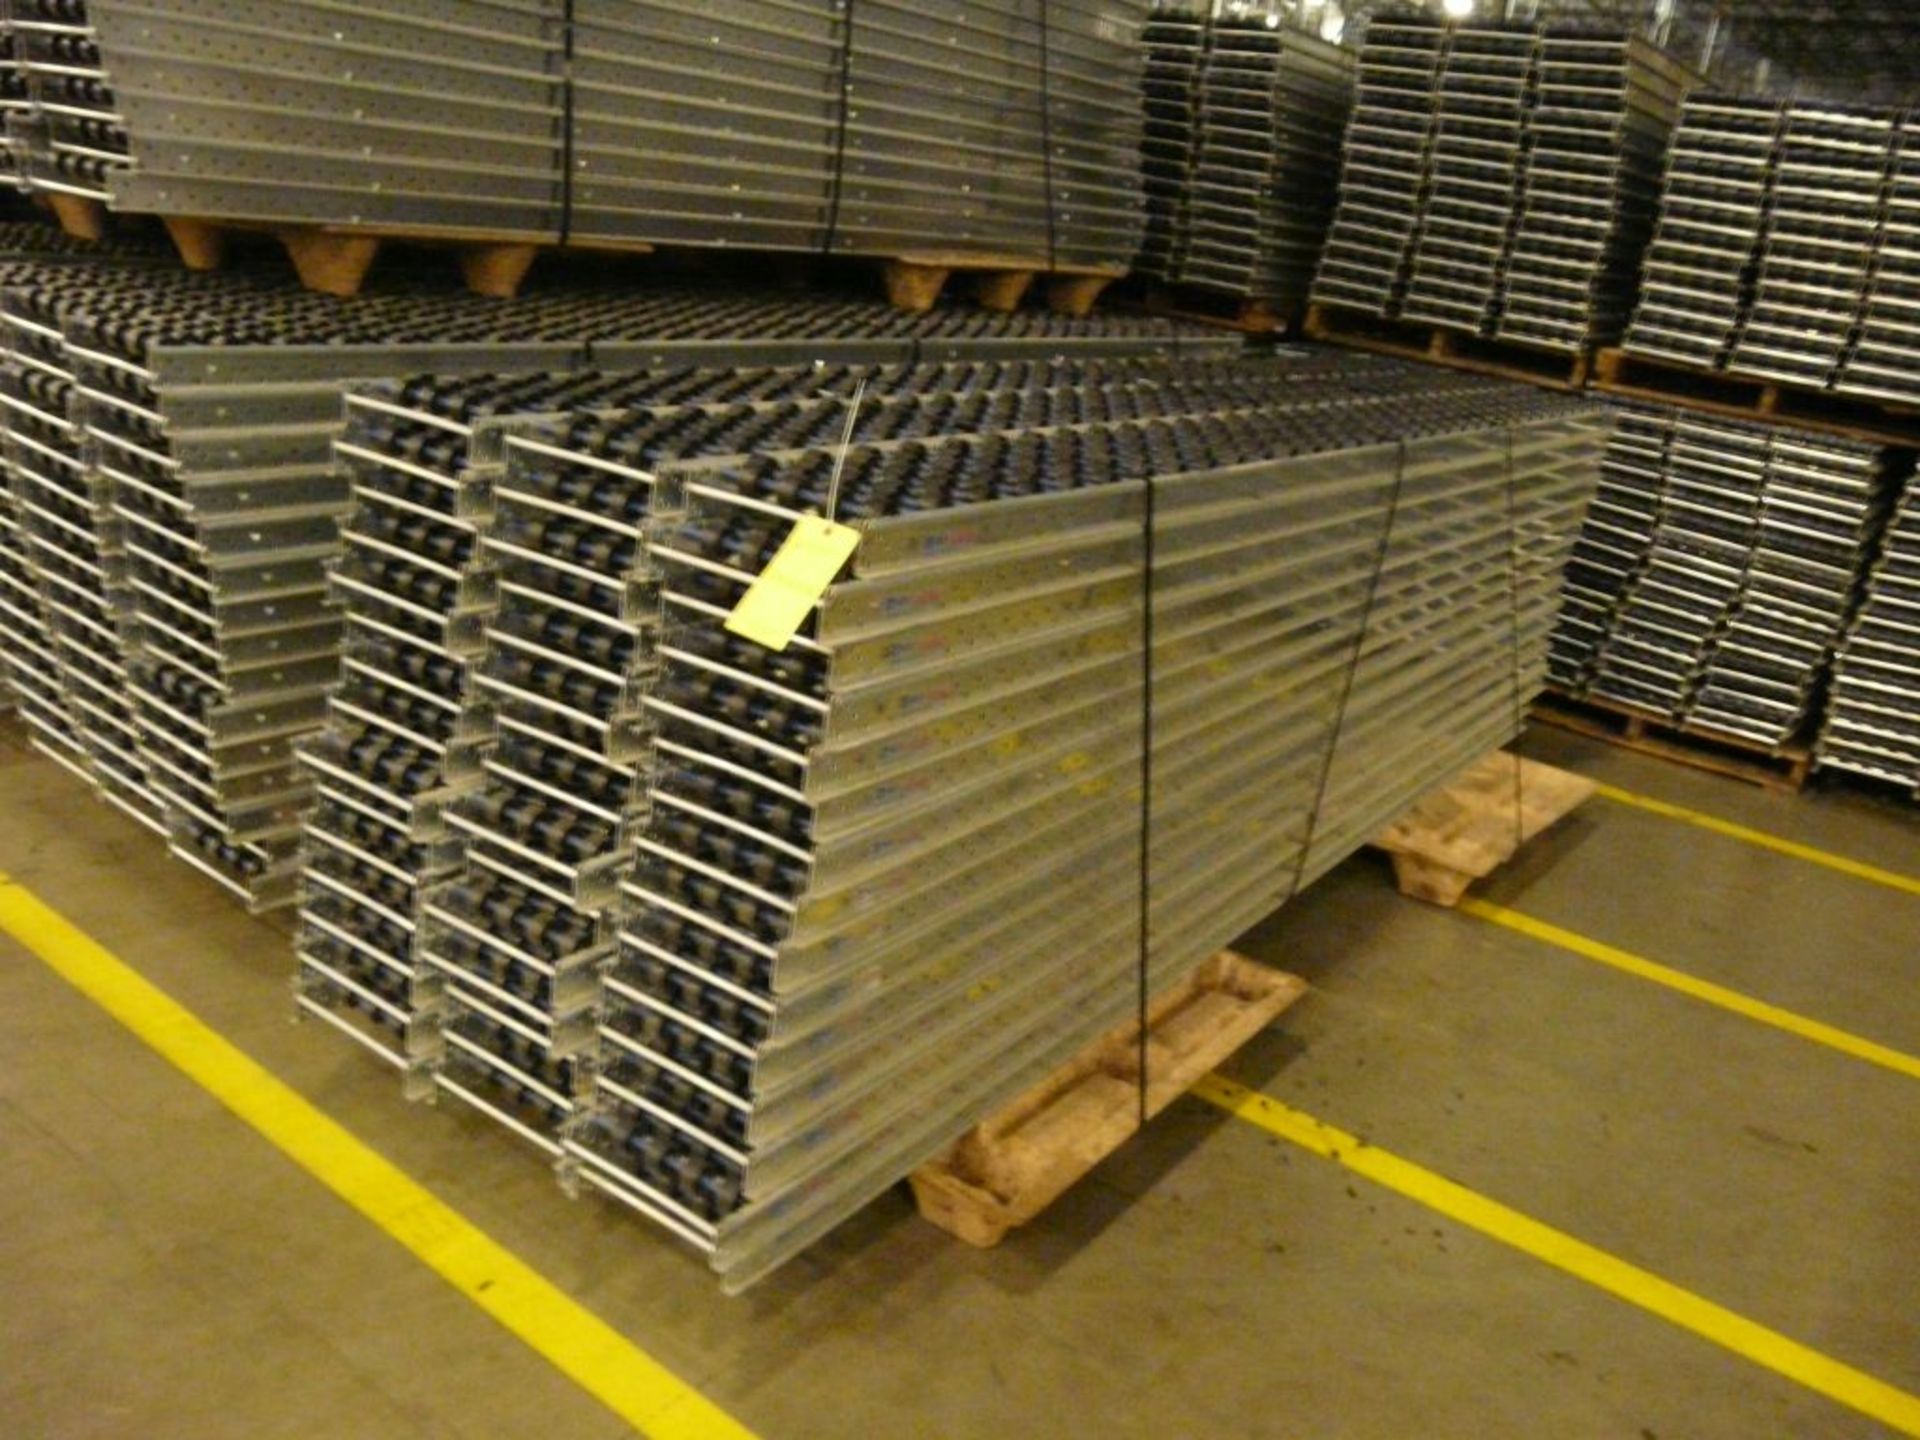 Lot of (90) SpanTrack Wheelbed Carton Flow Conveyors - 11.5'L x 11"W; Tag: 223624 - $30 Lot